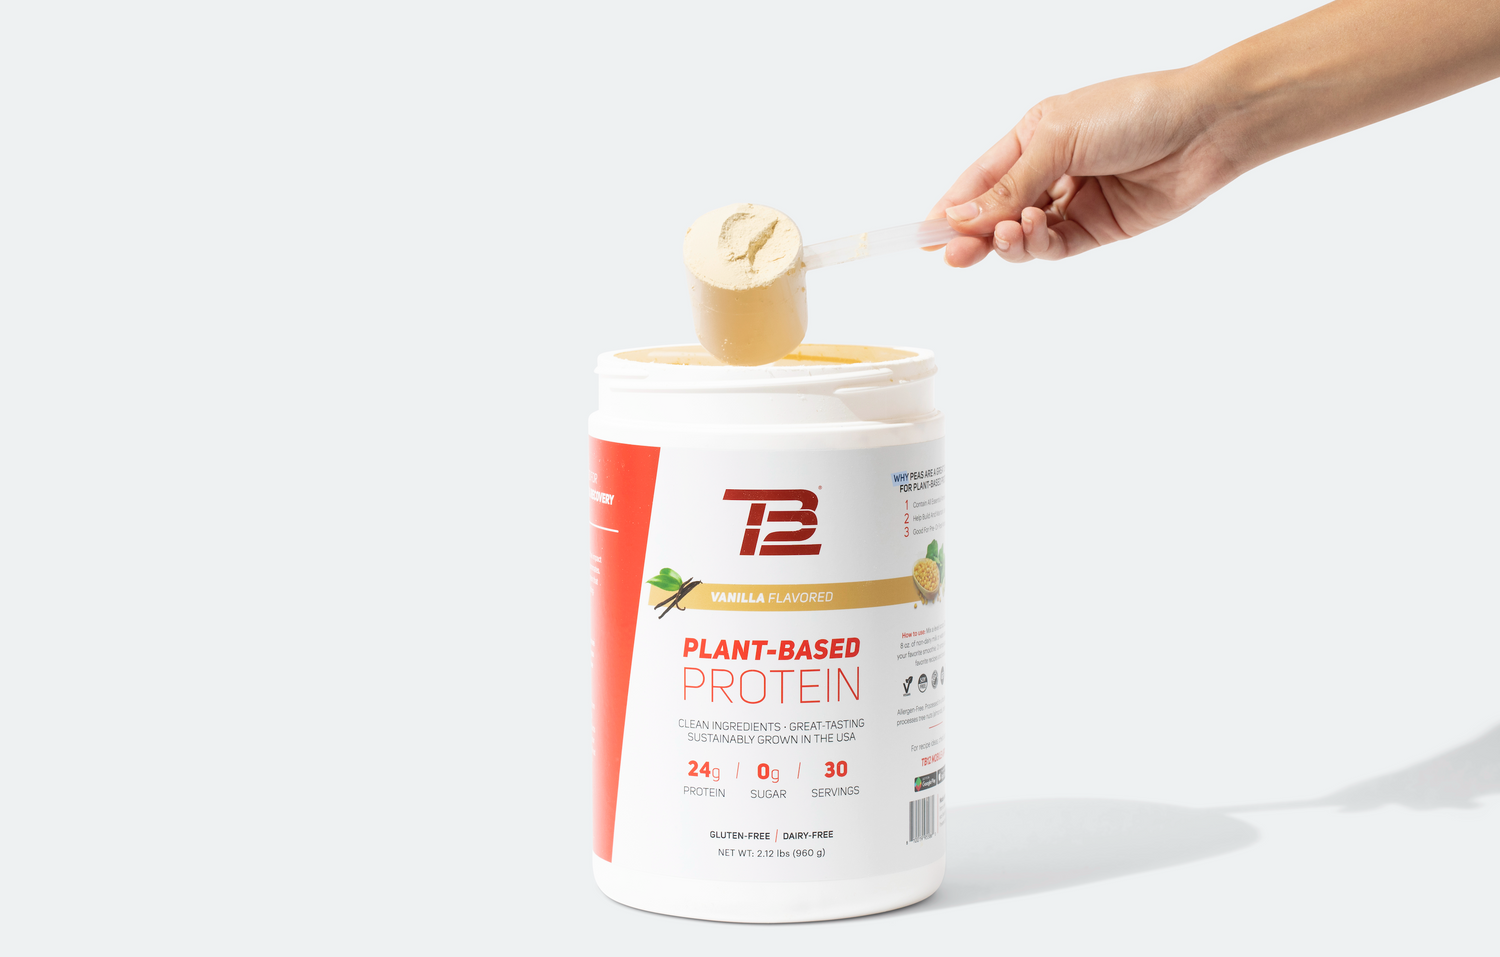 Protein Powder: The Complete Guide To Plant-Based Protein